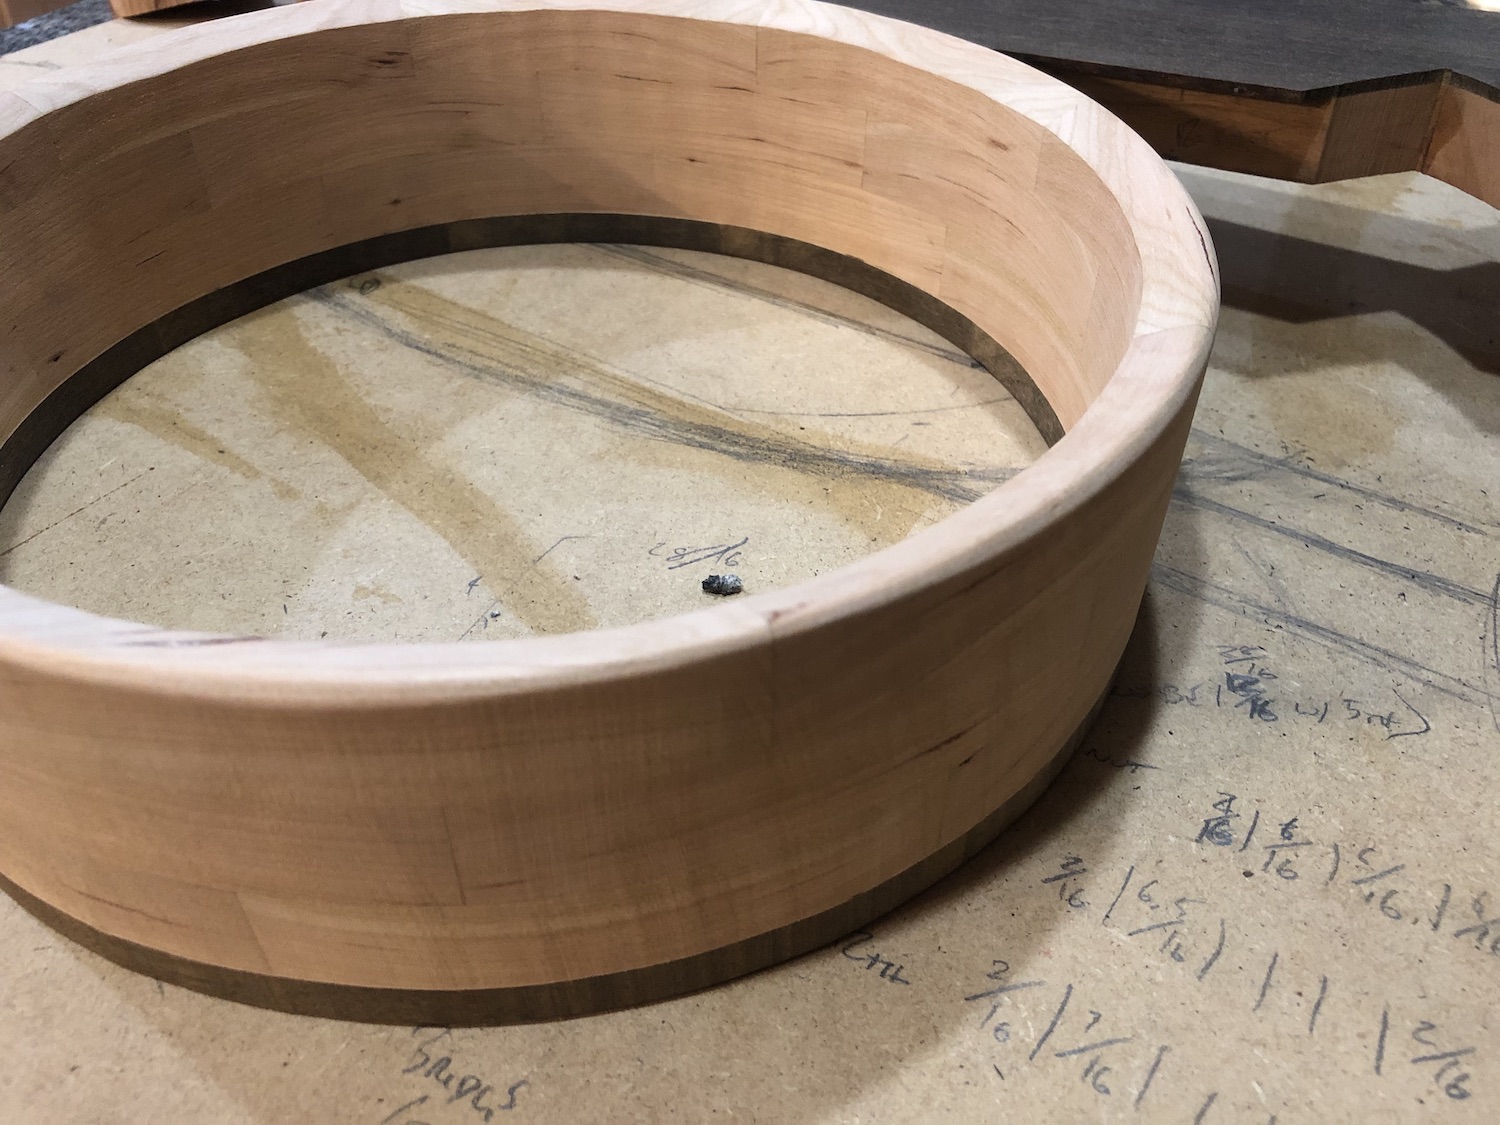 A sanded rim with bevel in from the outside edge